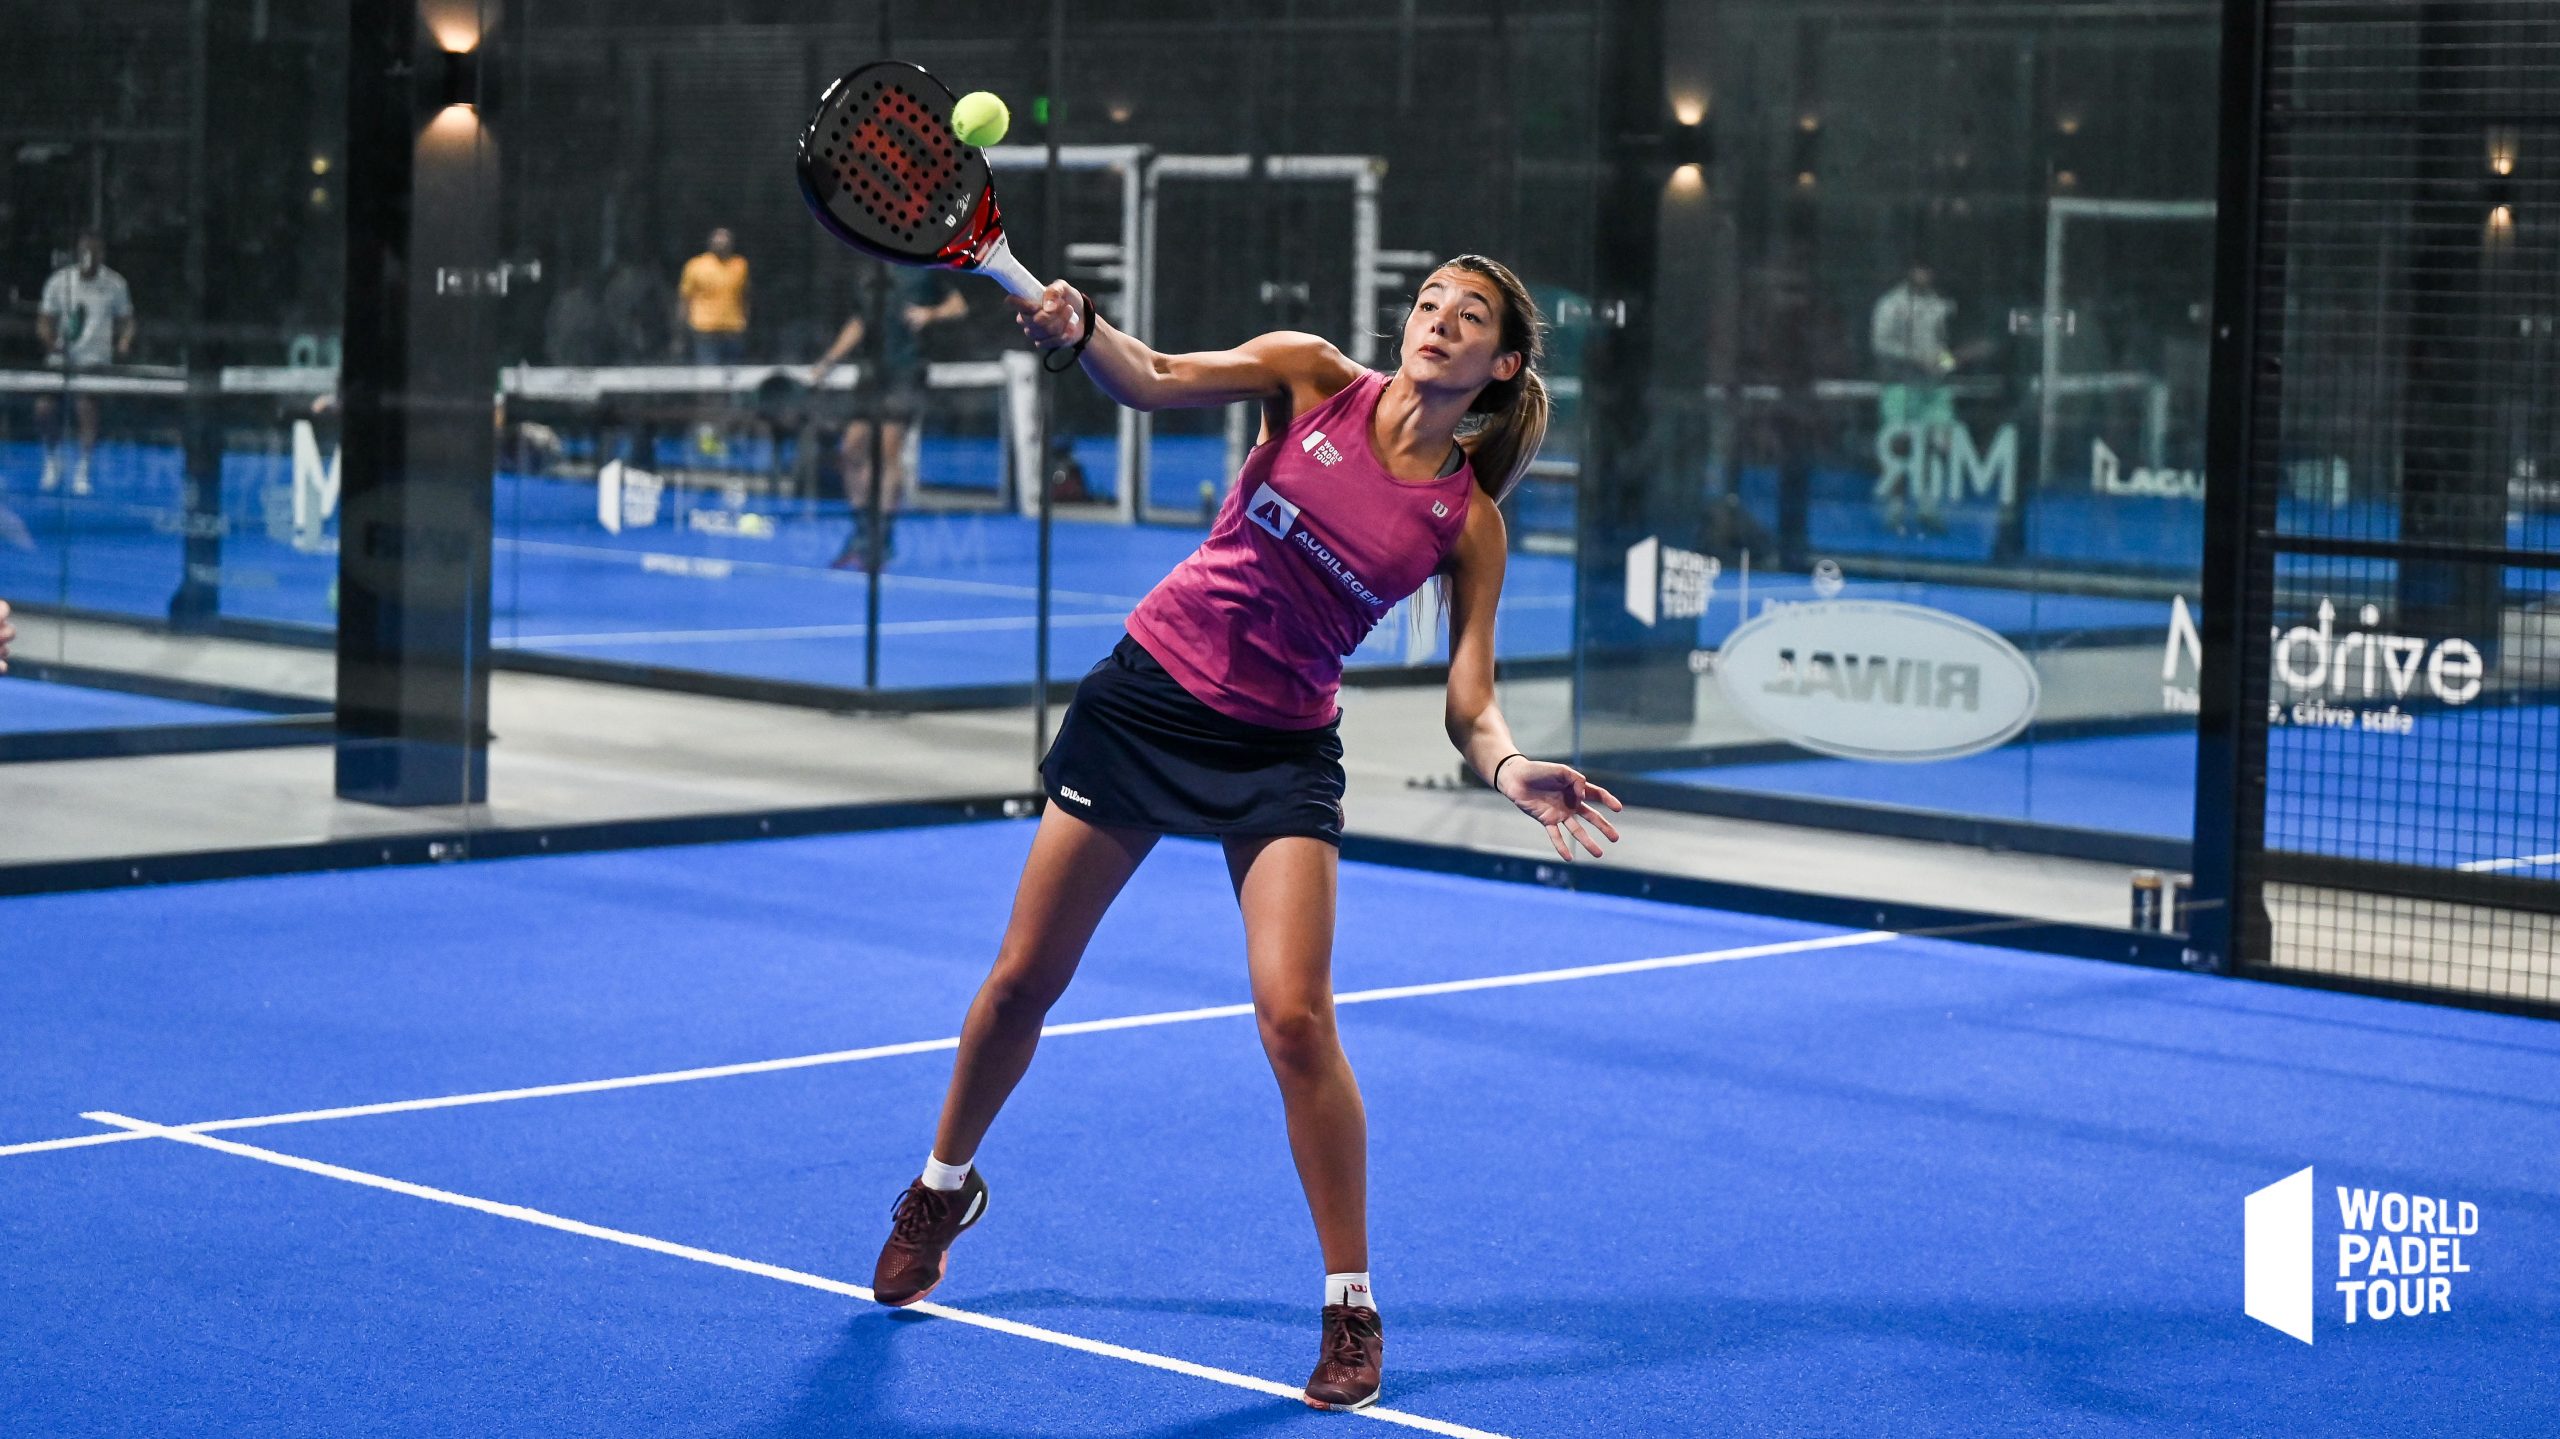 Local survives in Danish Padel Open 2022 pre-qualifying